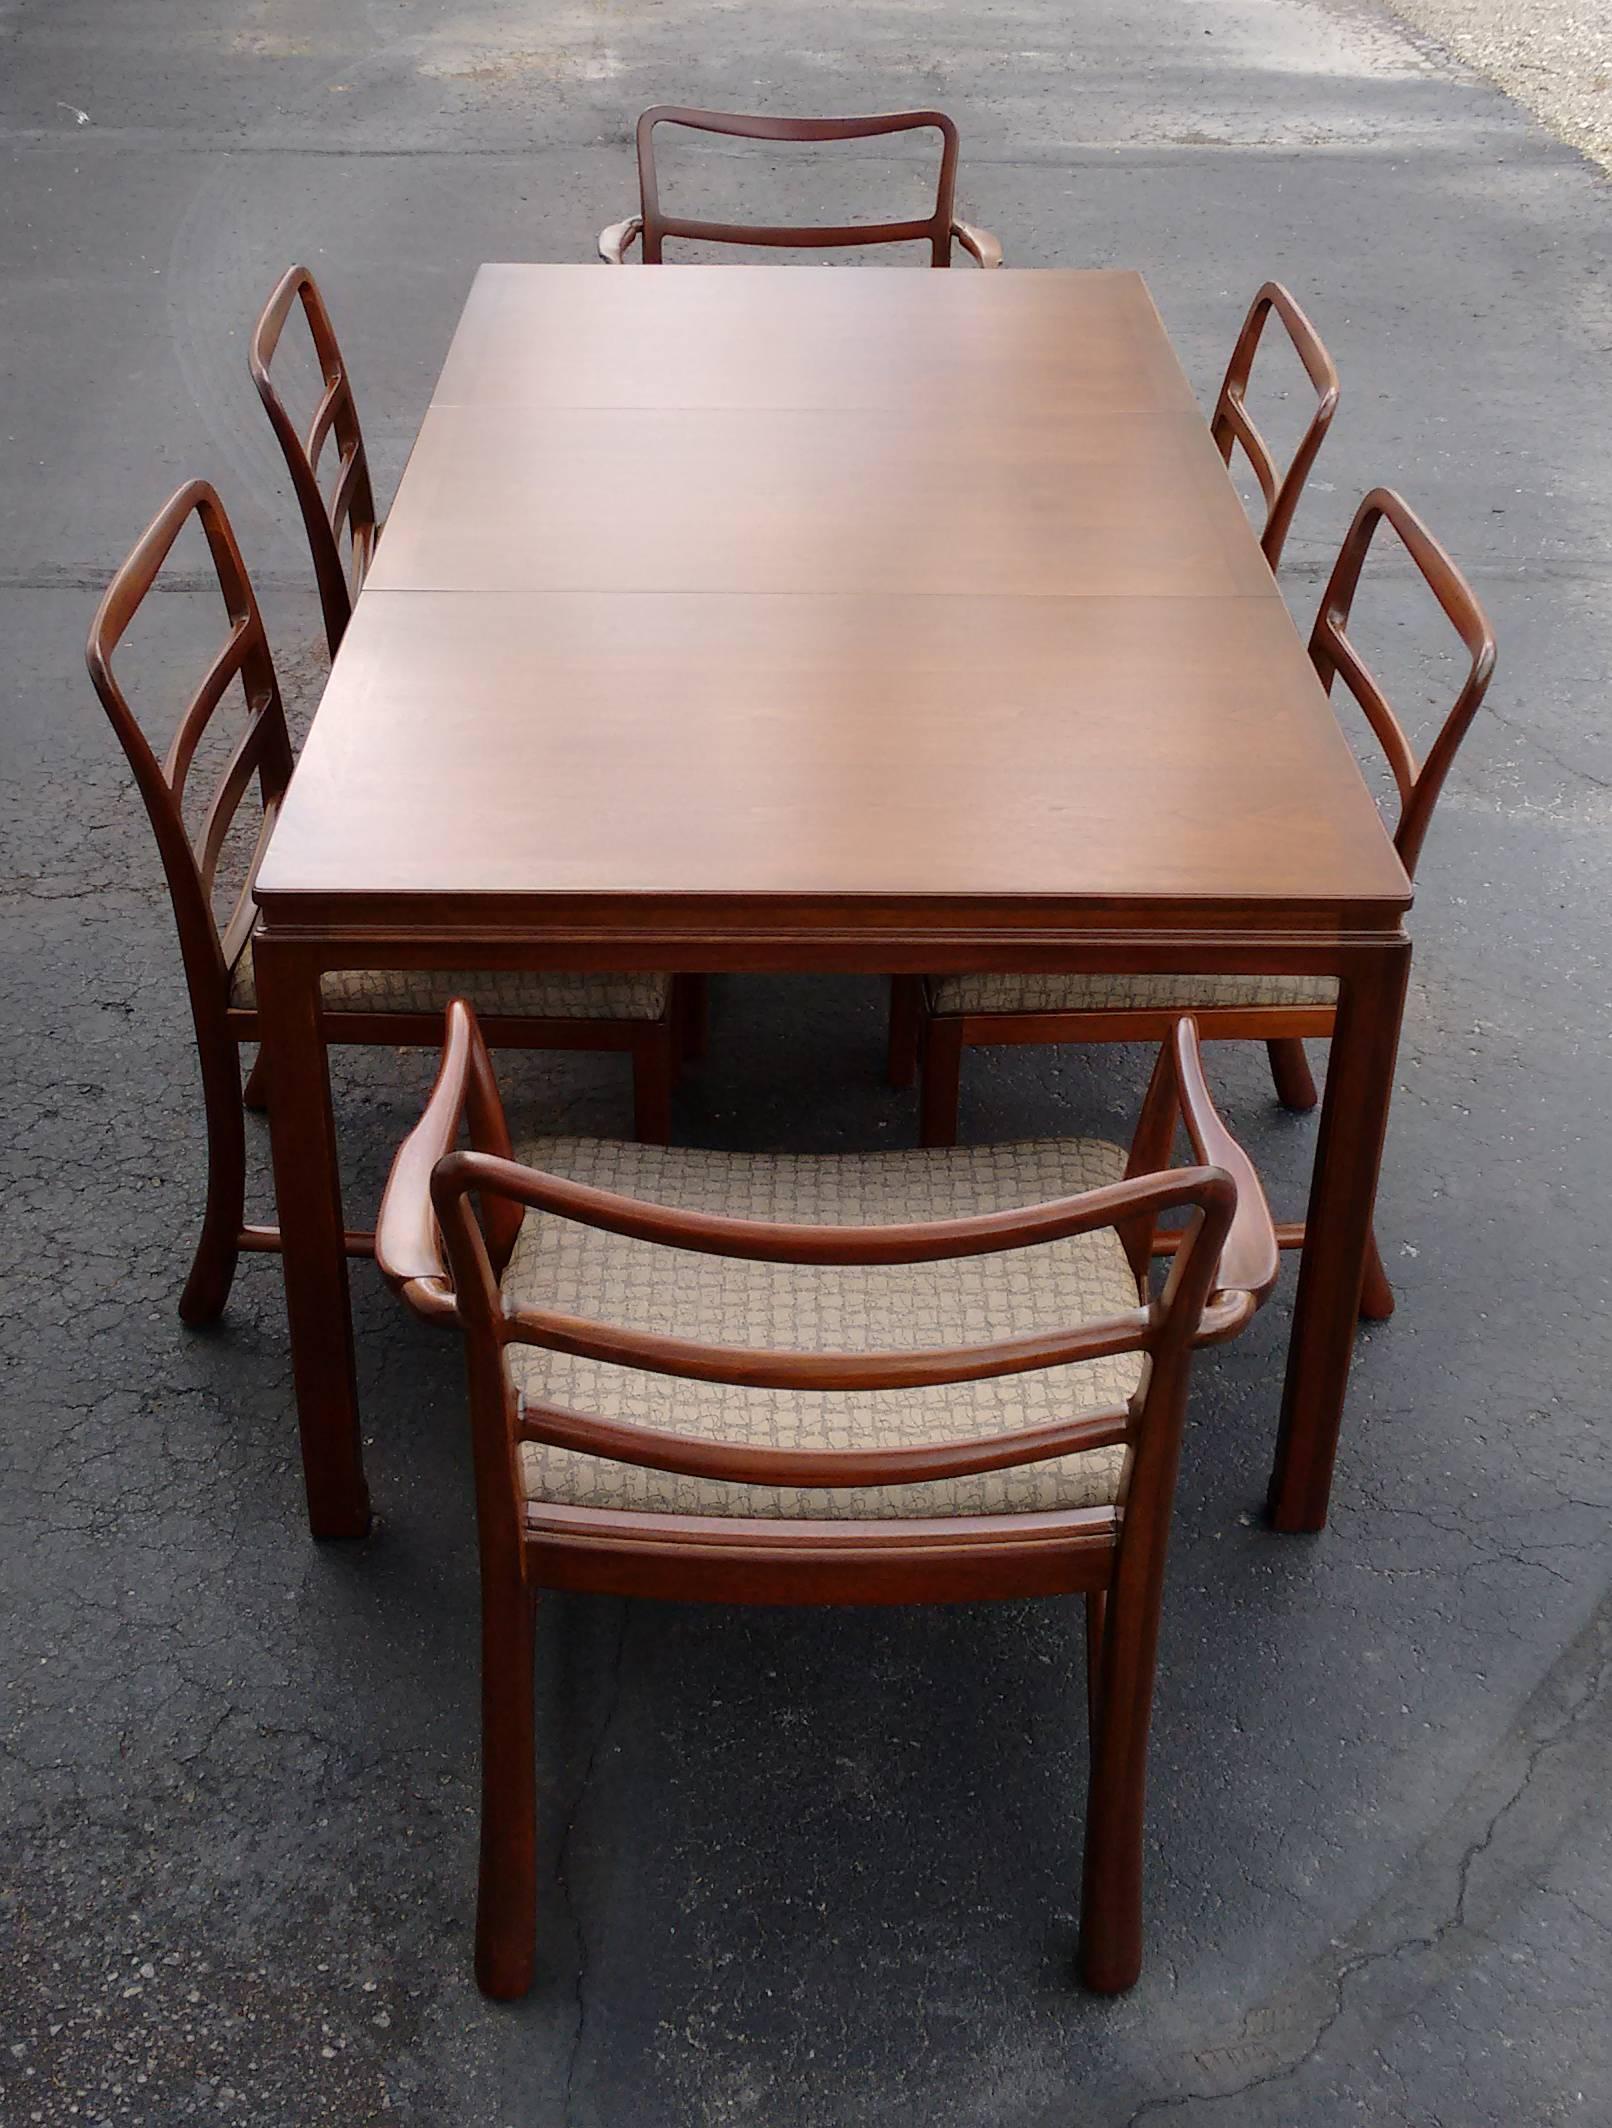 For your consideration is a brown mahogany dining table by Dunbar with six chairs, four side chairs and two with arms and one leaf. In excellent condition. Professionally restored and refinished. The dimensions of the chairs with arms are 33